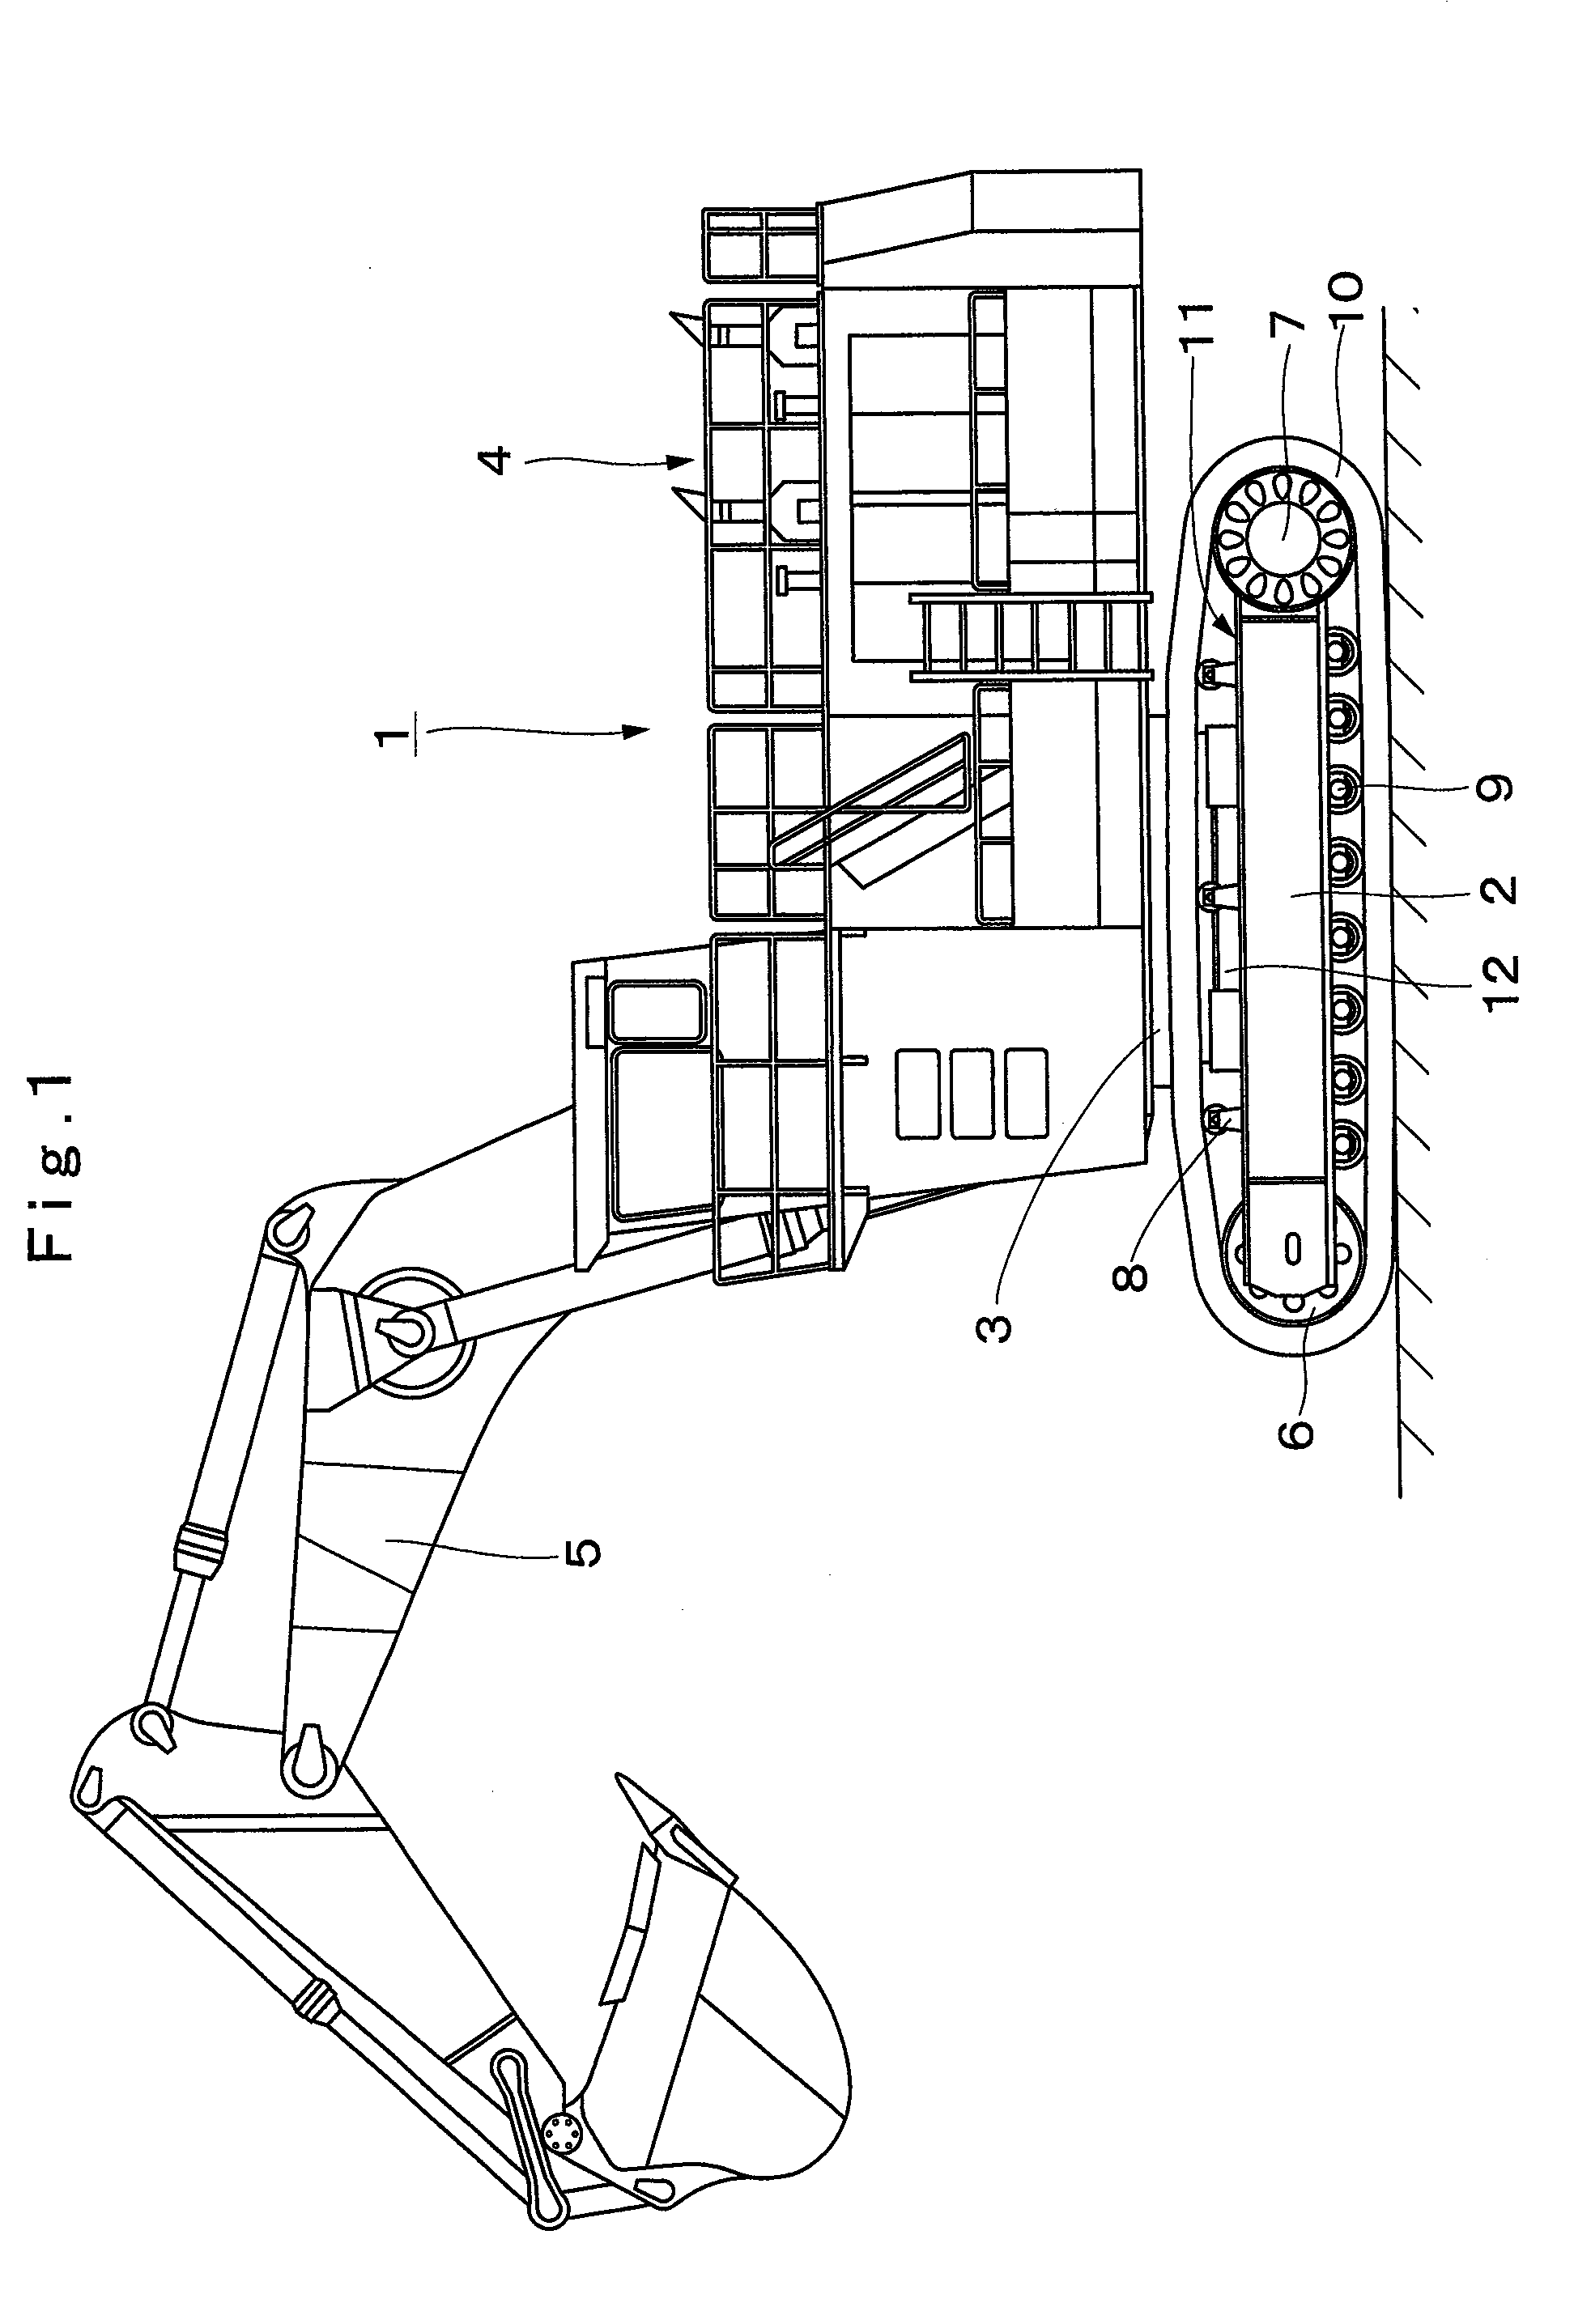 Truck frame for construction machine